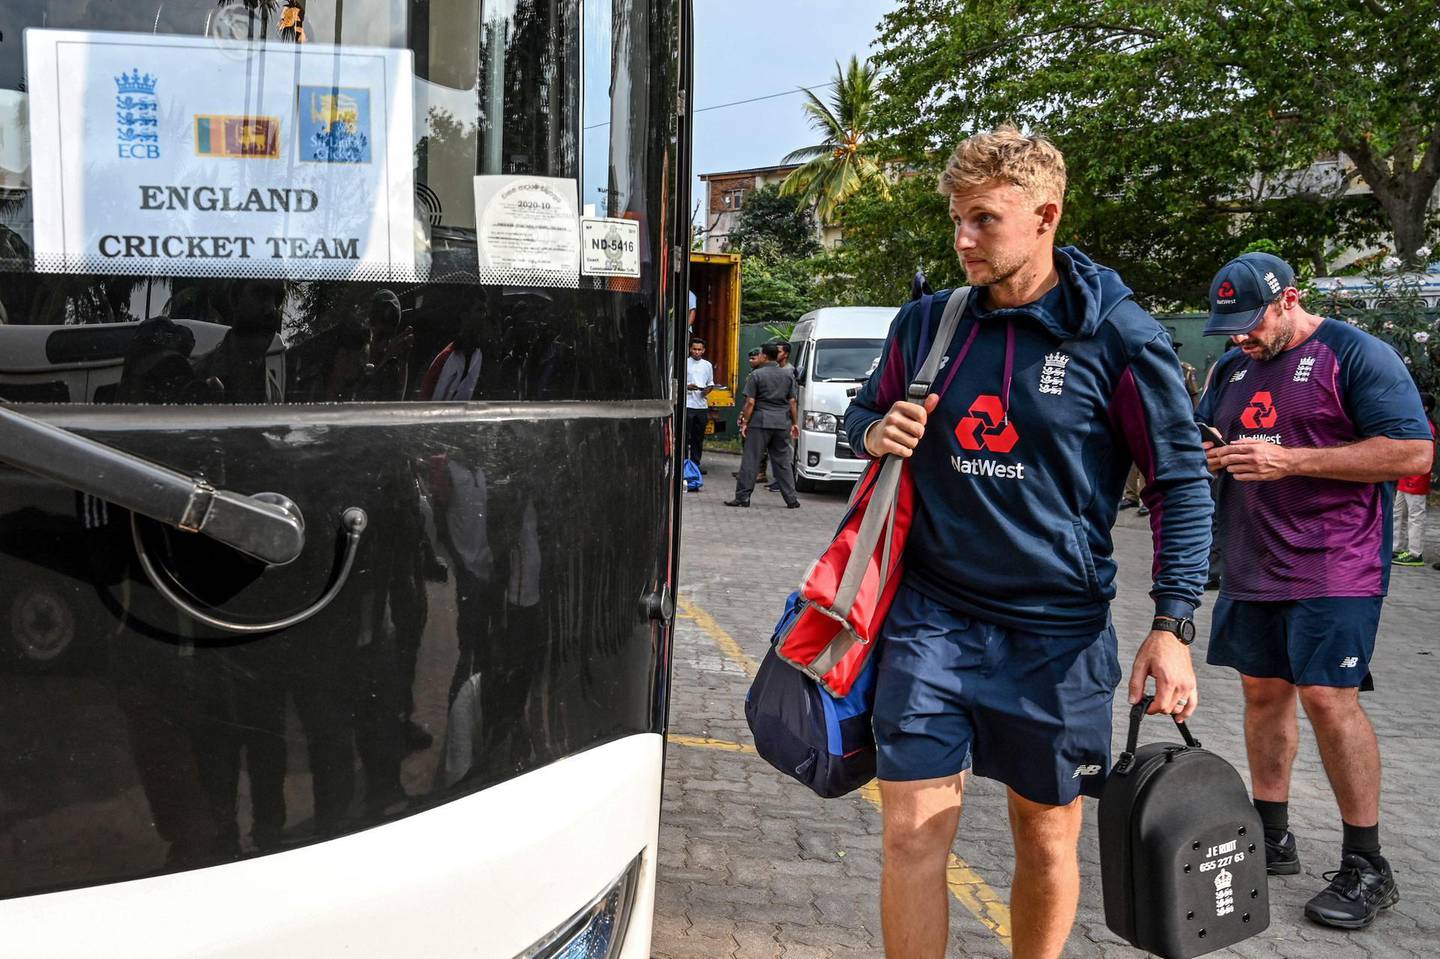 England's captain Joe Root (L) boards the bus after the Test series against Sri Lanka was postponed at the P. Sara Oval Cricket Stadium in Colombo on March 13, 2020.  England's cricket team abruptly pulled out of a tour of Sri Lanka on March 13 over the mounting coronavirus pandemic. A practice match in Colombo was halted as the team announced they would be flying back to London, and the first of two Test matches due to start on March 19 has been postponed. / AFP / LAKRUWAN WANNIARACHCHI
